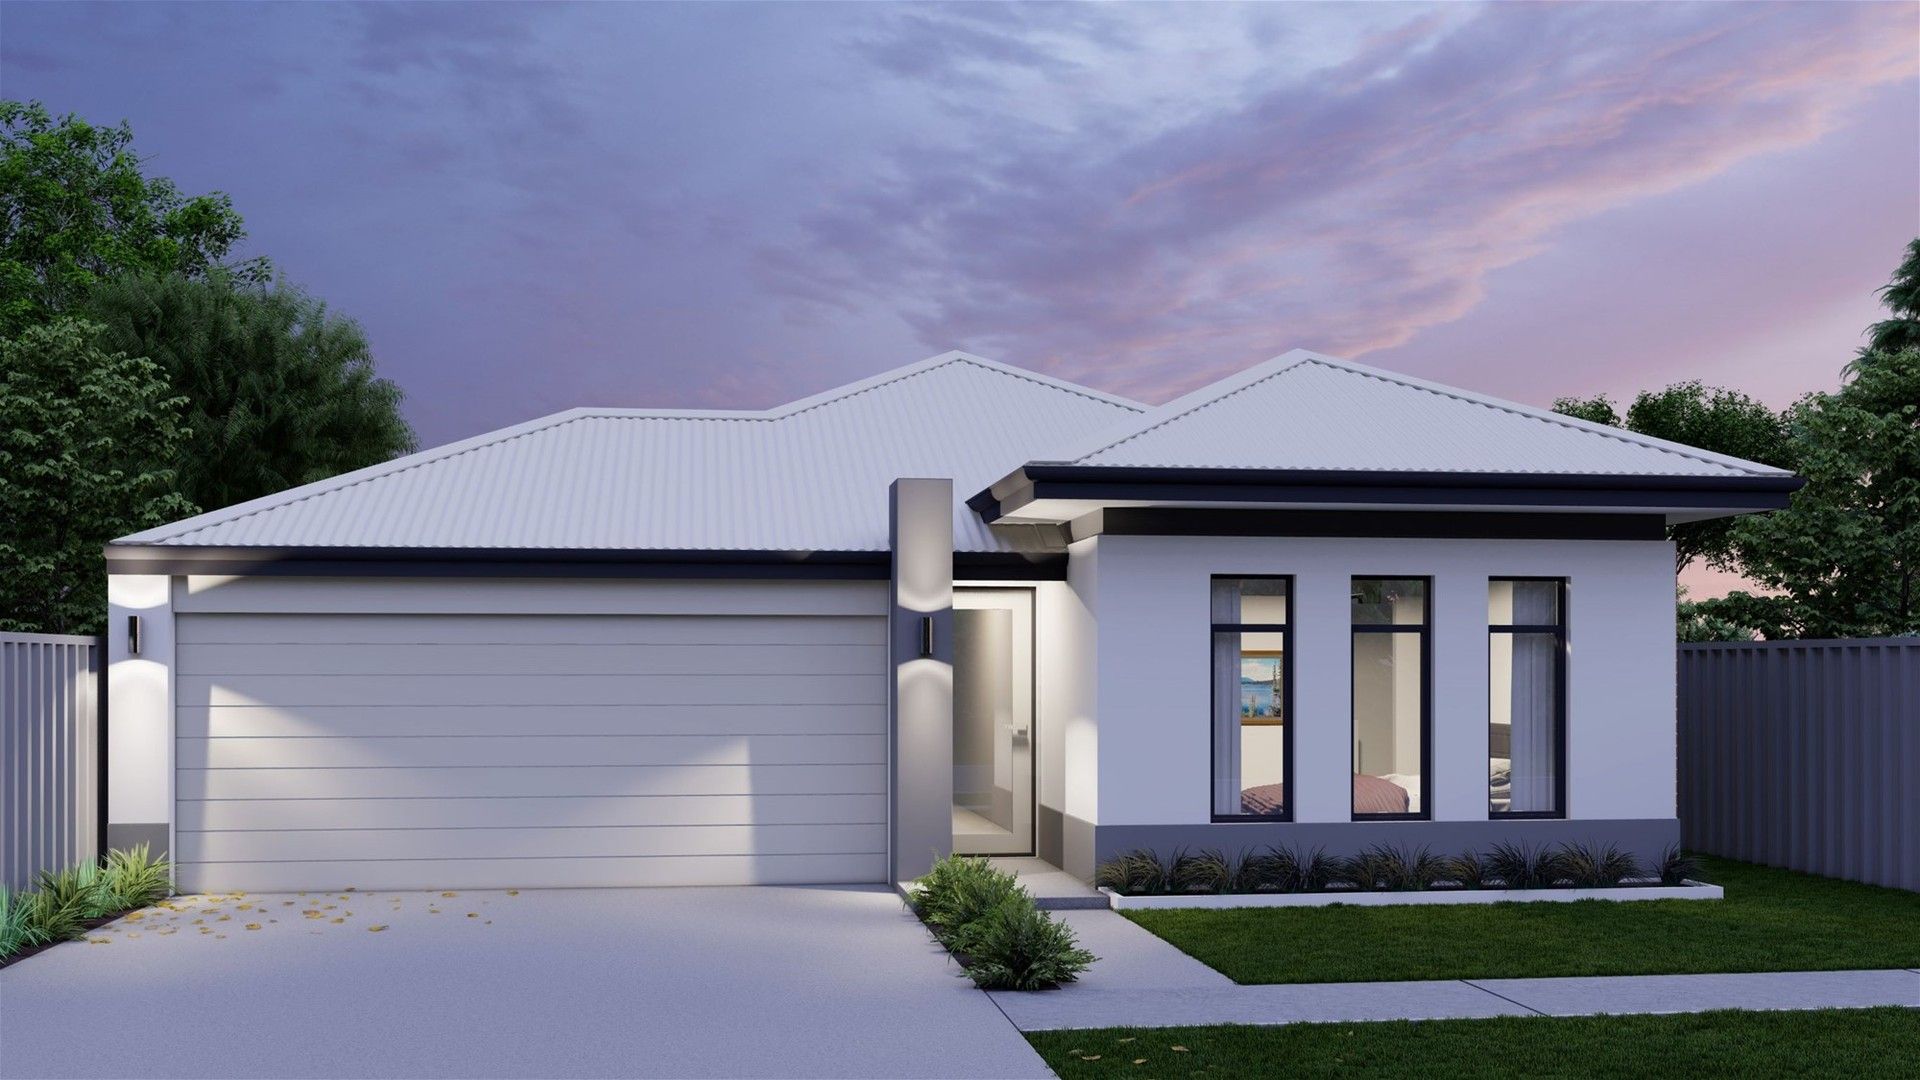 4 bedrooms New House & Land in Lot 207 Wagstaff Way DIANELLA WA, 6059